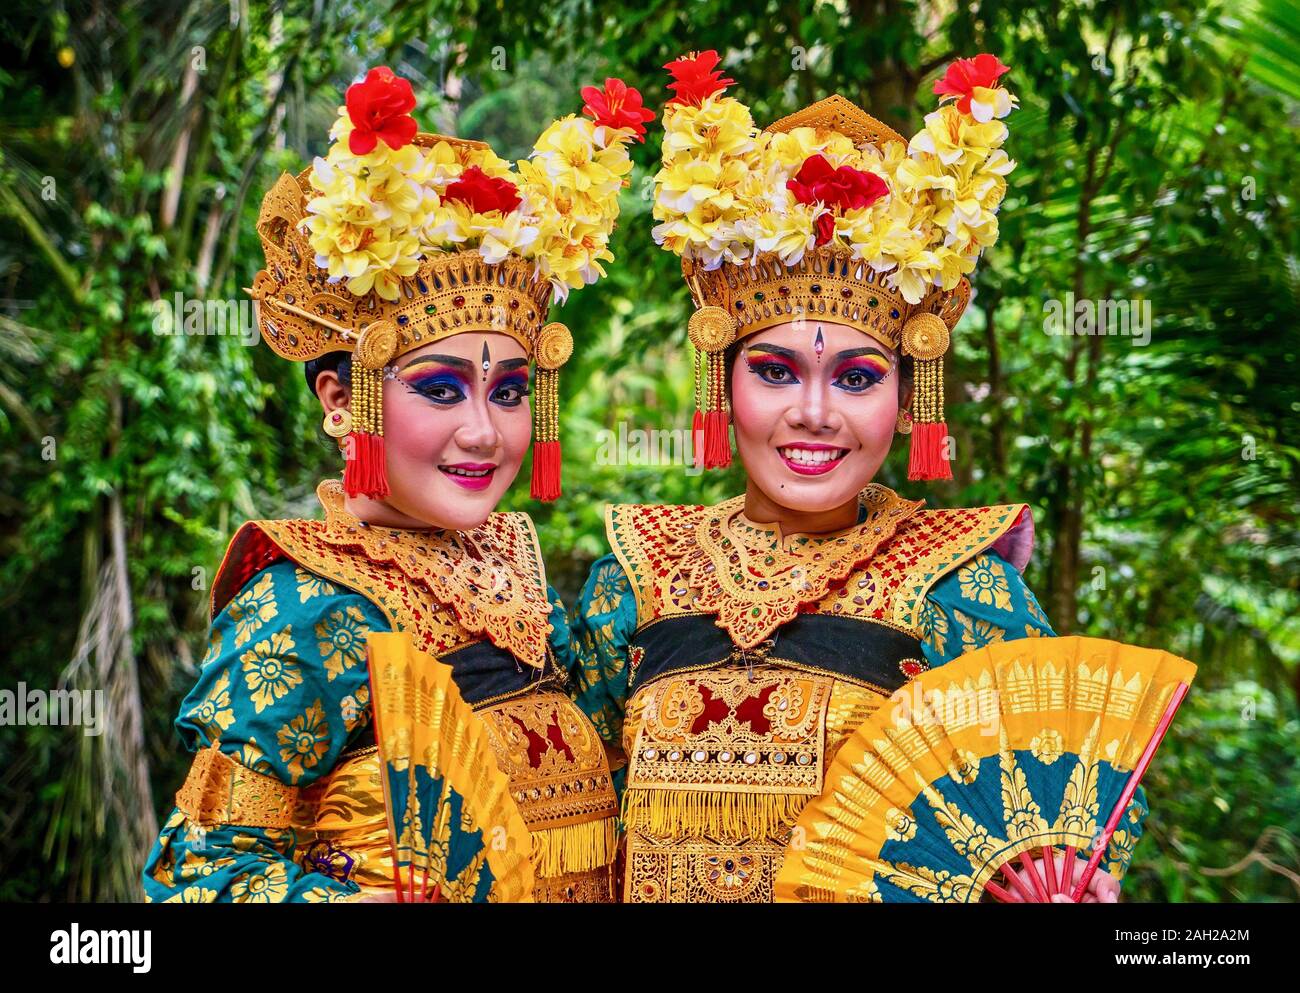 The ornate costumes, face makeup, and flower headdresses of traditional kecak fire dancers as they prepare for a cultural performance. Stock Photo